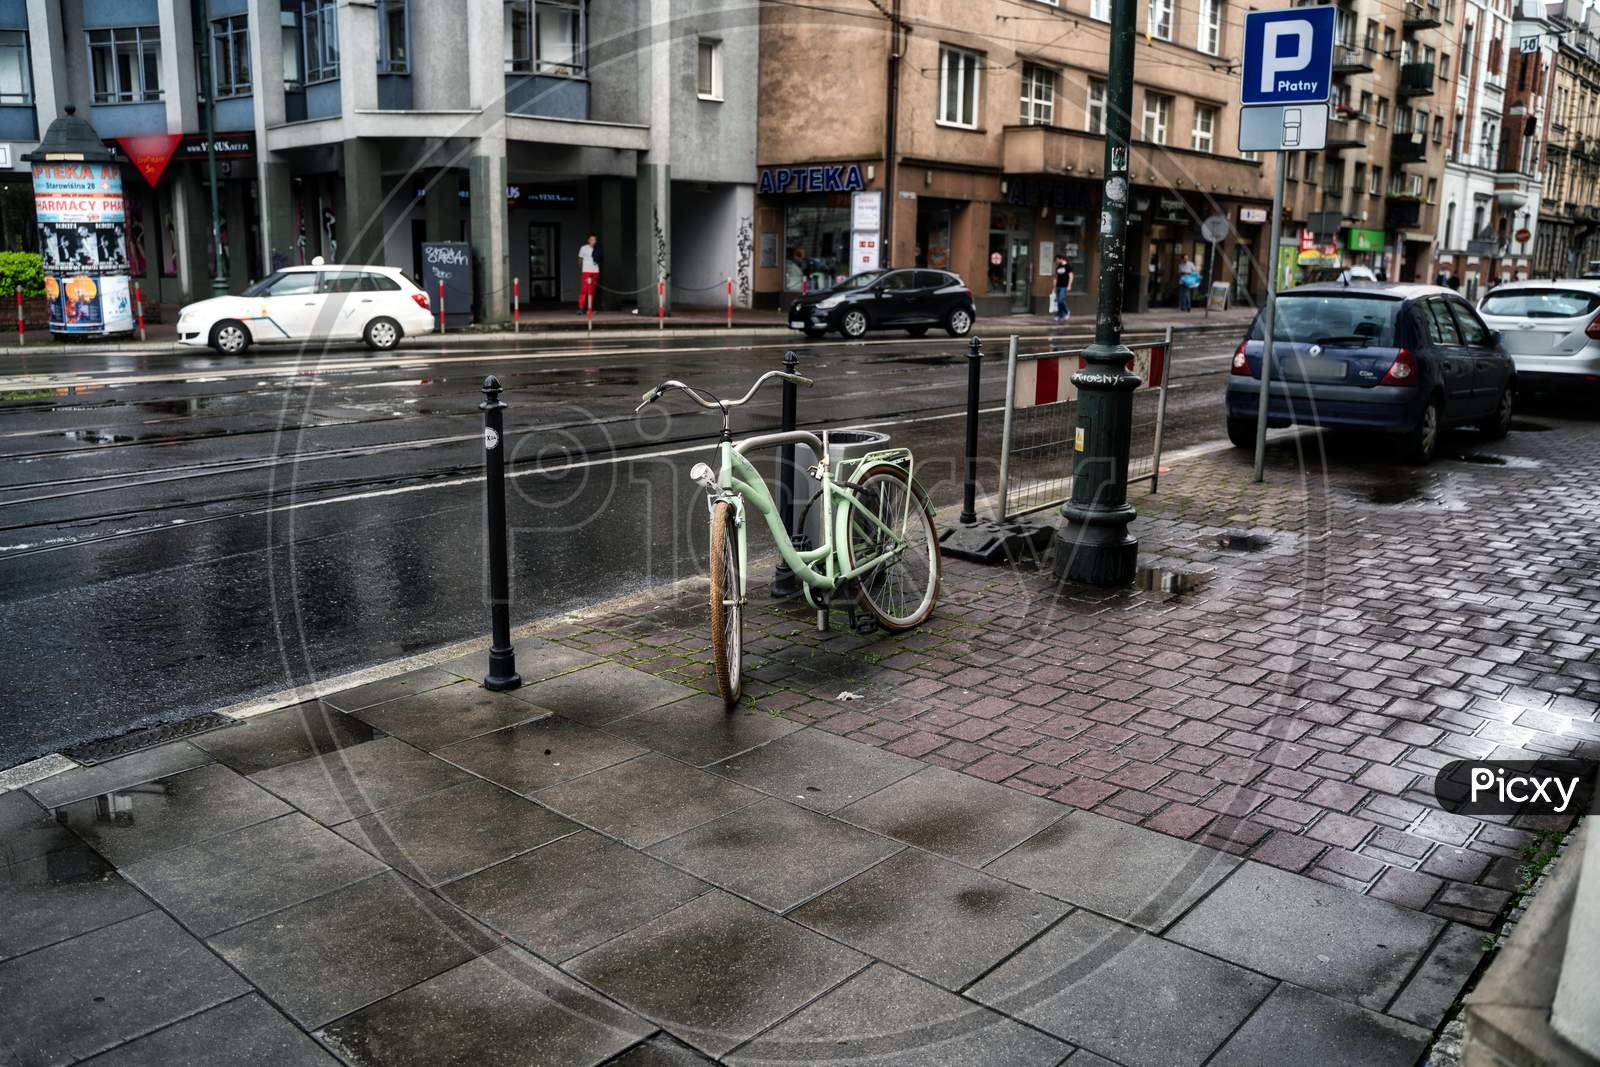 Krakow, Poland - July 18, 2020: A Wide Angle Shot Of A White Bicycle Parked Next To Busy Street In Krakow In Rainy Weather